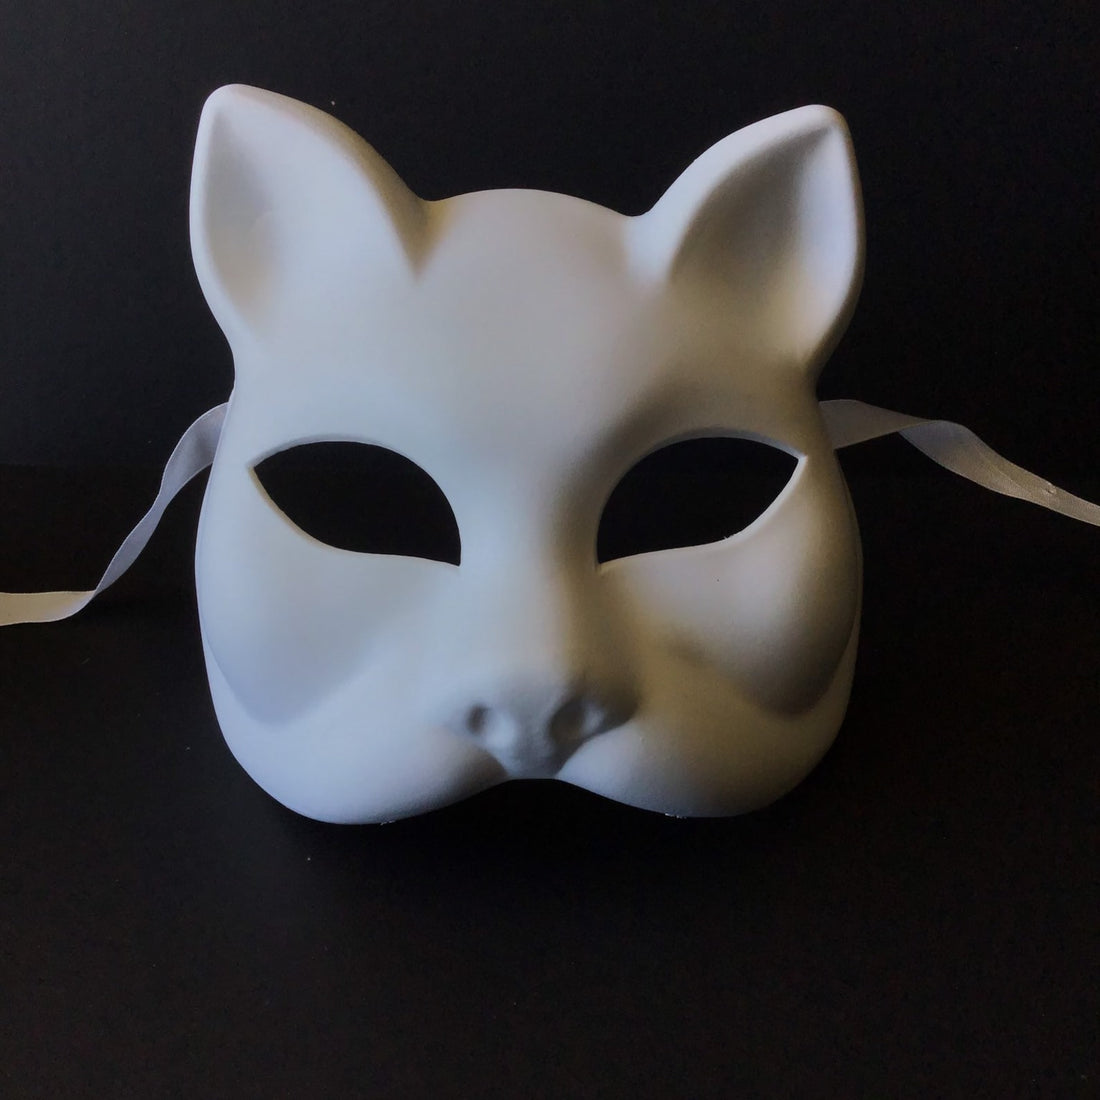 Blank white DIY masquerade mask in cat gatto style for sale.